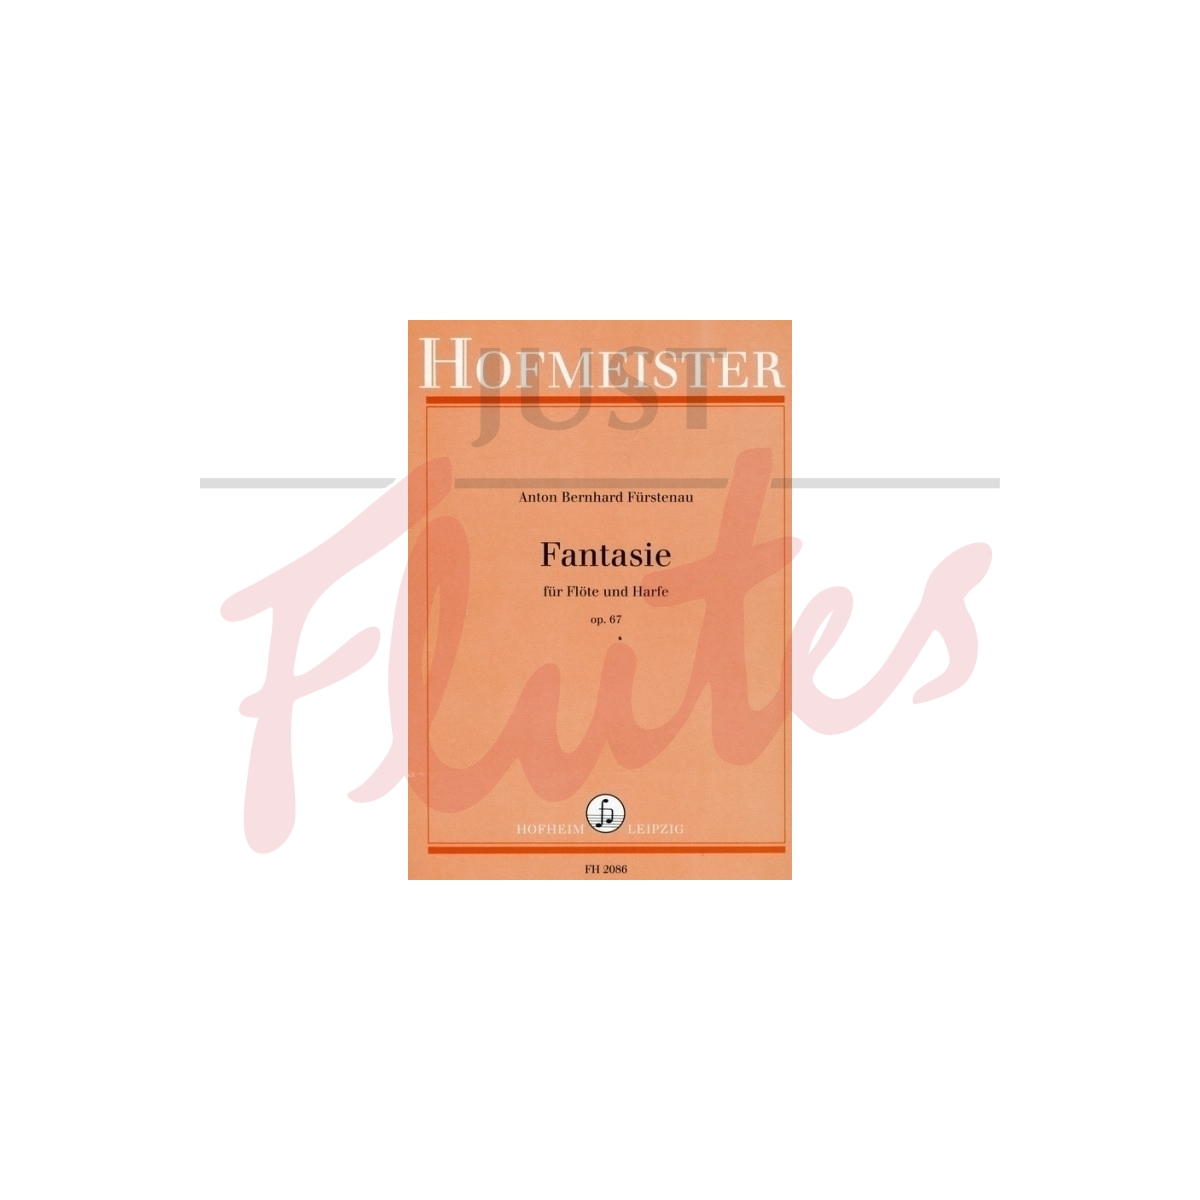 Fantasie for Flute and Harp